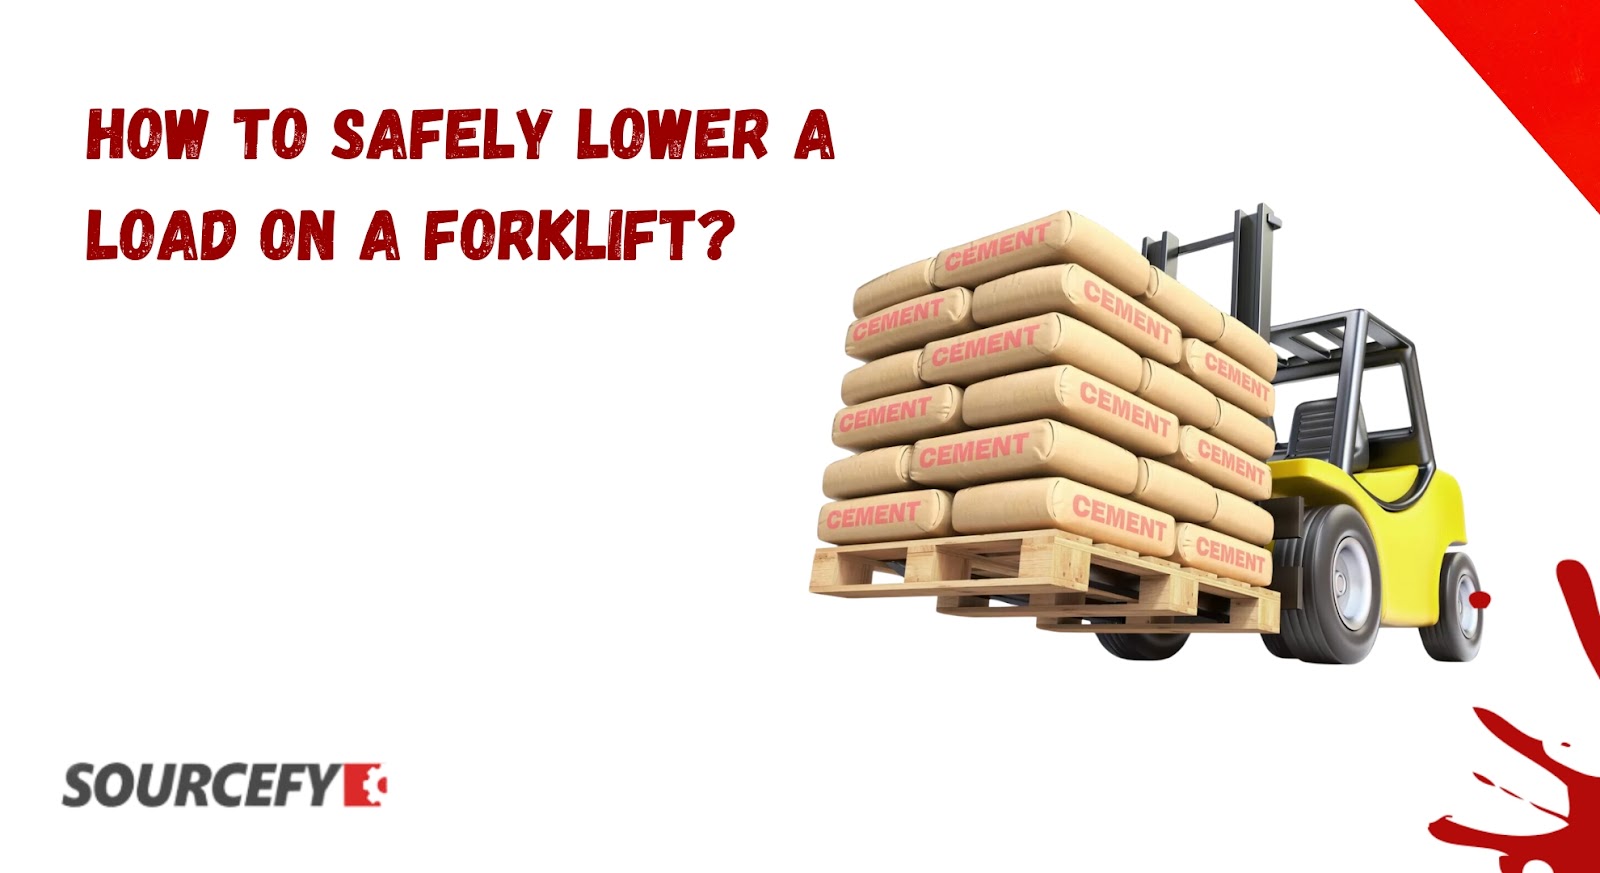 How do You Safely Lower a Load on a Forklift?